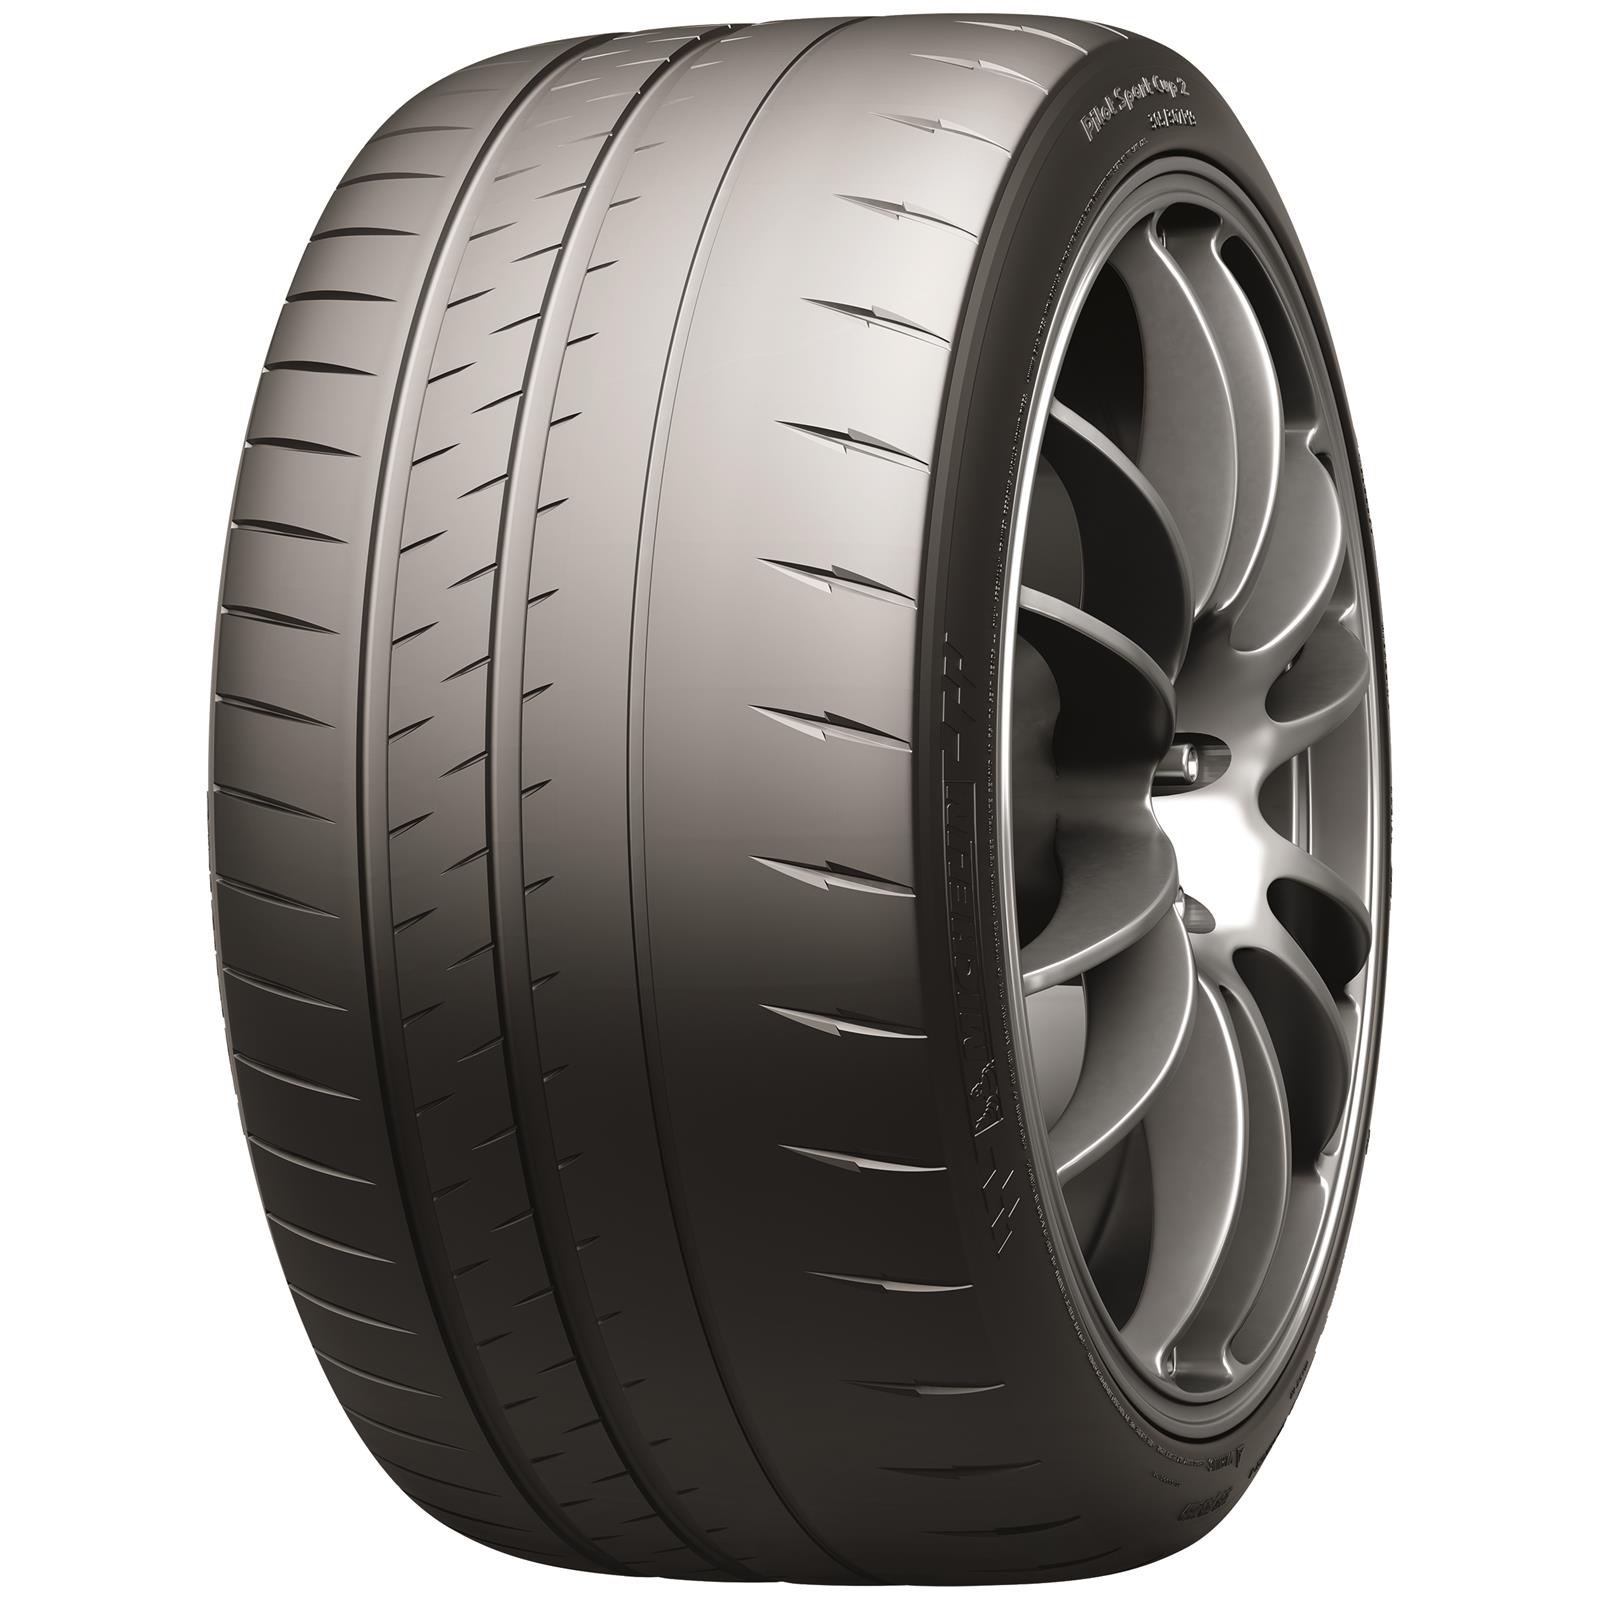 Anvelope auto MICHELIN SPORT CUP 2 MO1 XL 315/30 R21 105Y